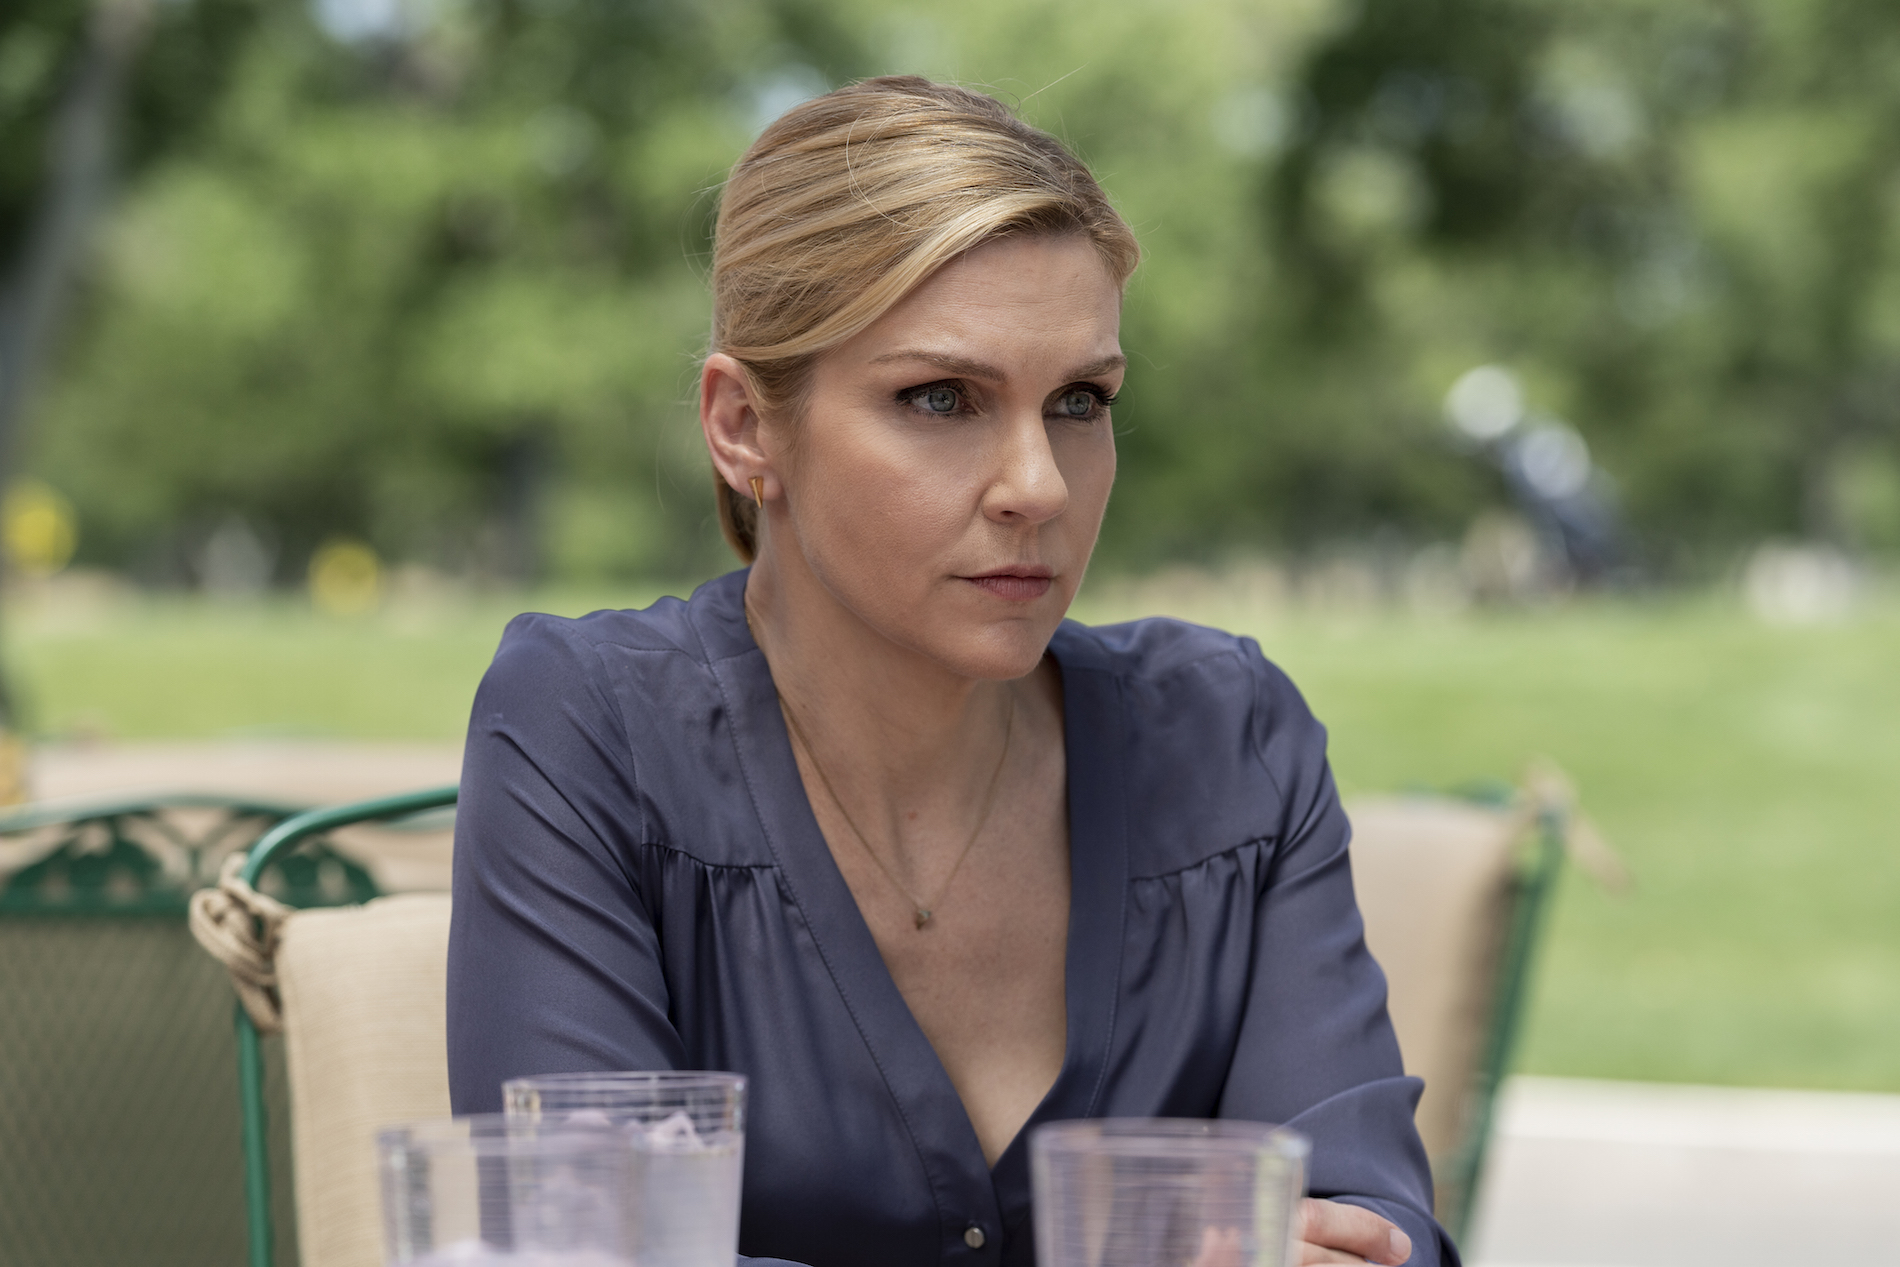 Rhea Seehorn as Kim Wexler - Better Call Saul _ Season 5, Episode 5 - Photo Credit: Greg Lewis/AMC/Sony Pictures Television